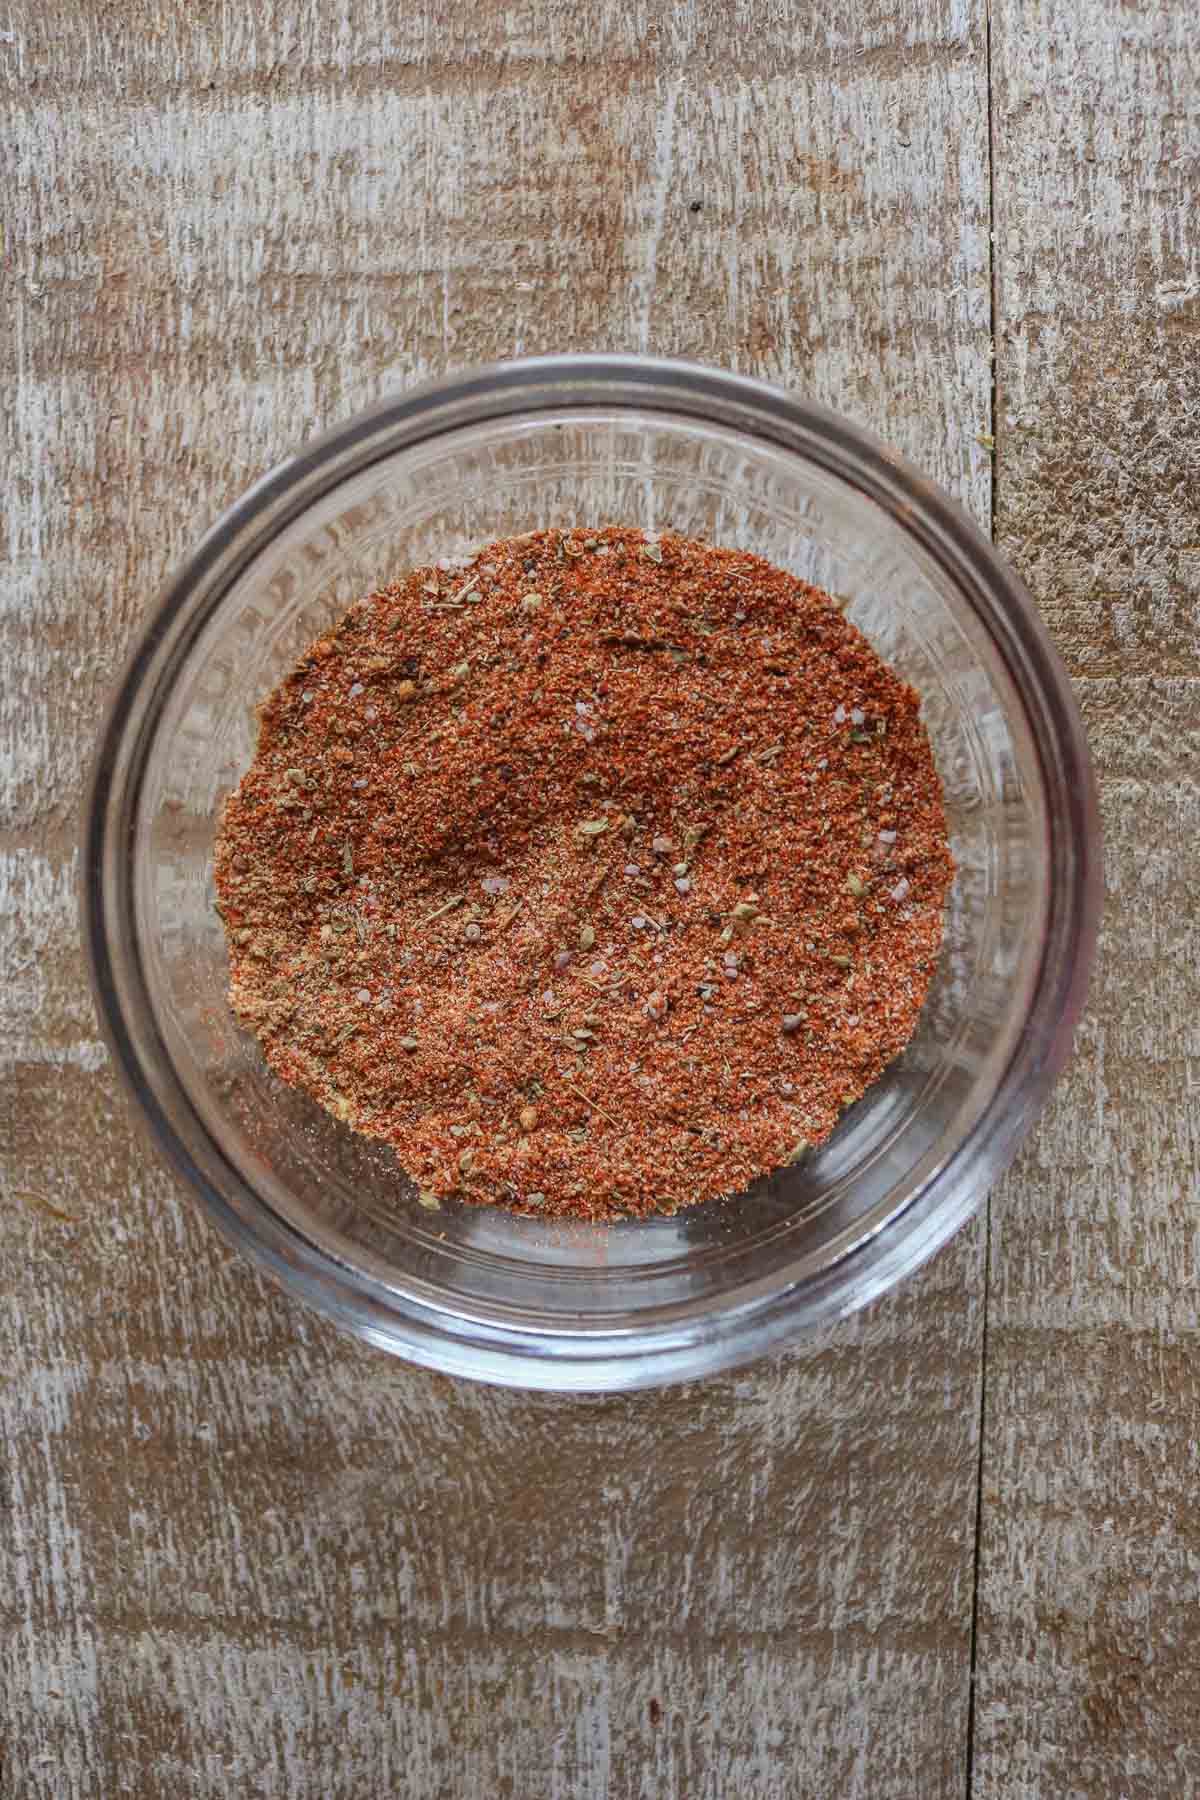 Spices for a slow cooker pulled pork recipe in a small glass dish.